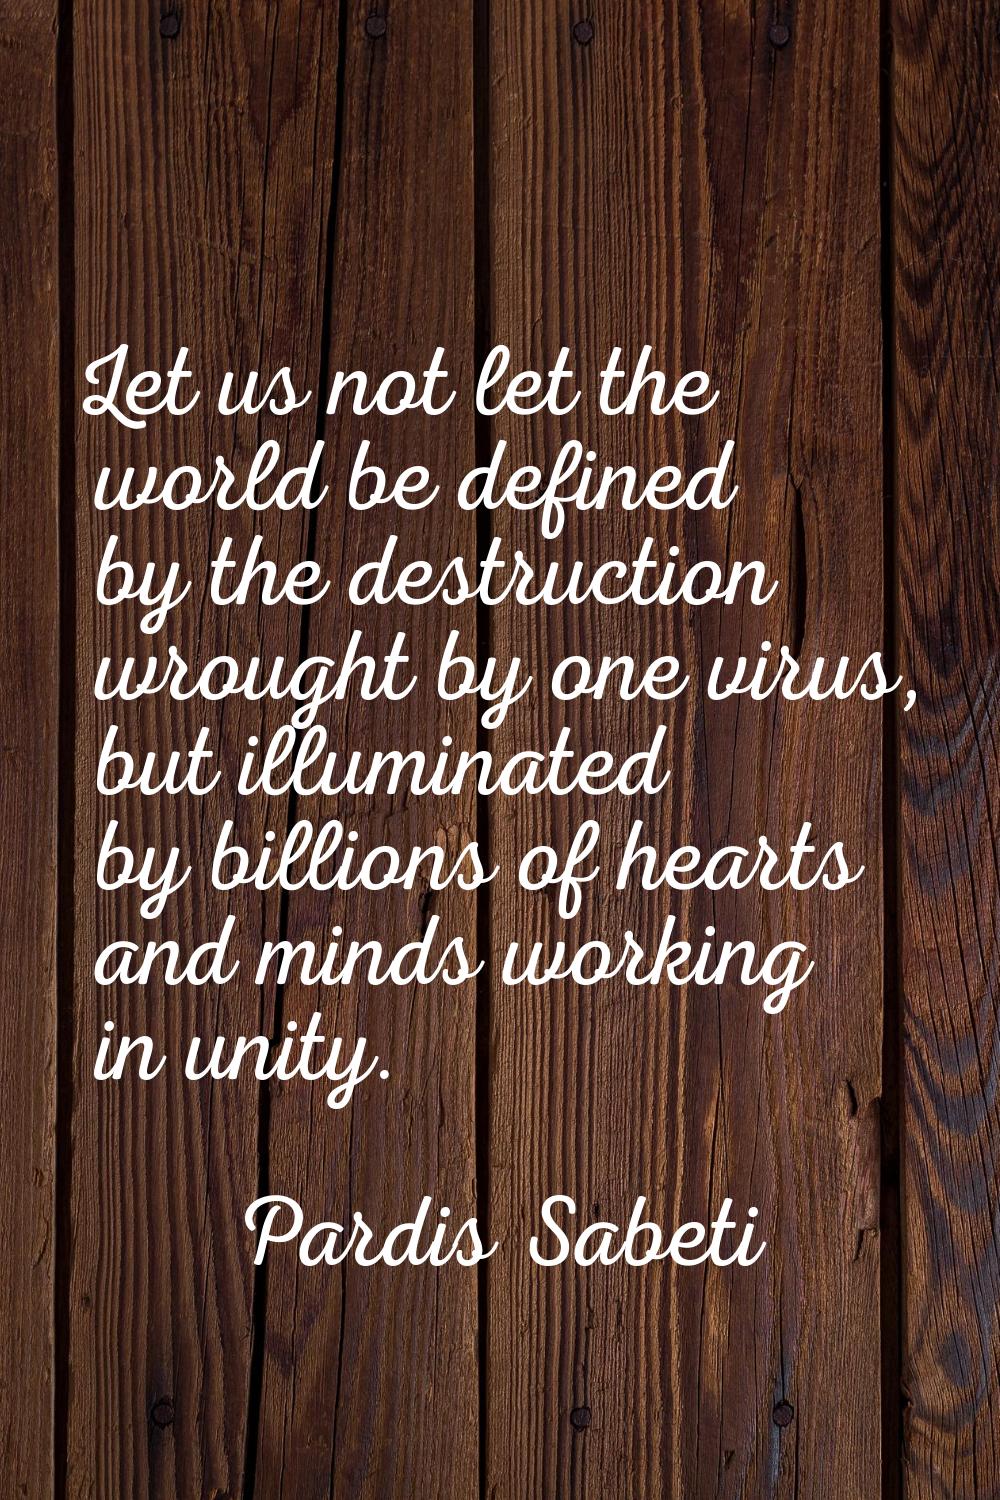 Let us not let the world be defined by the destruction wrought by one virus, but illuminated by bil